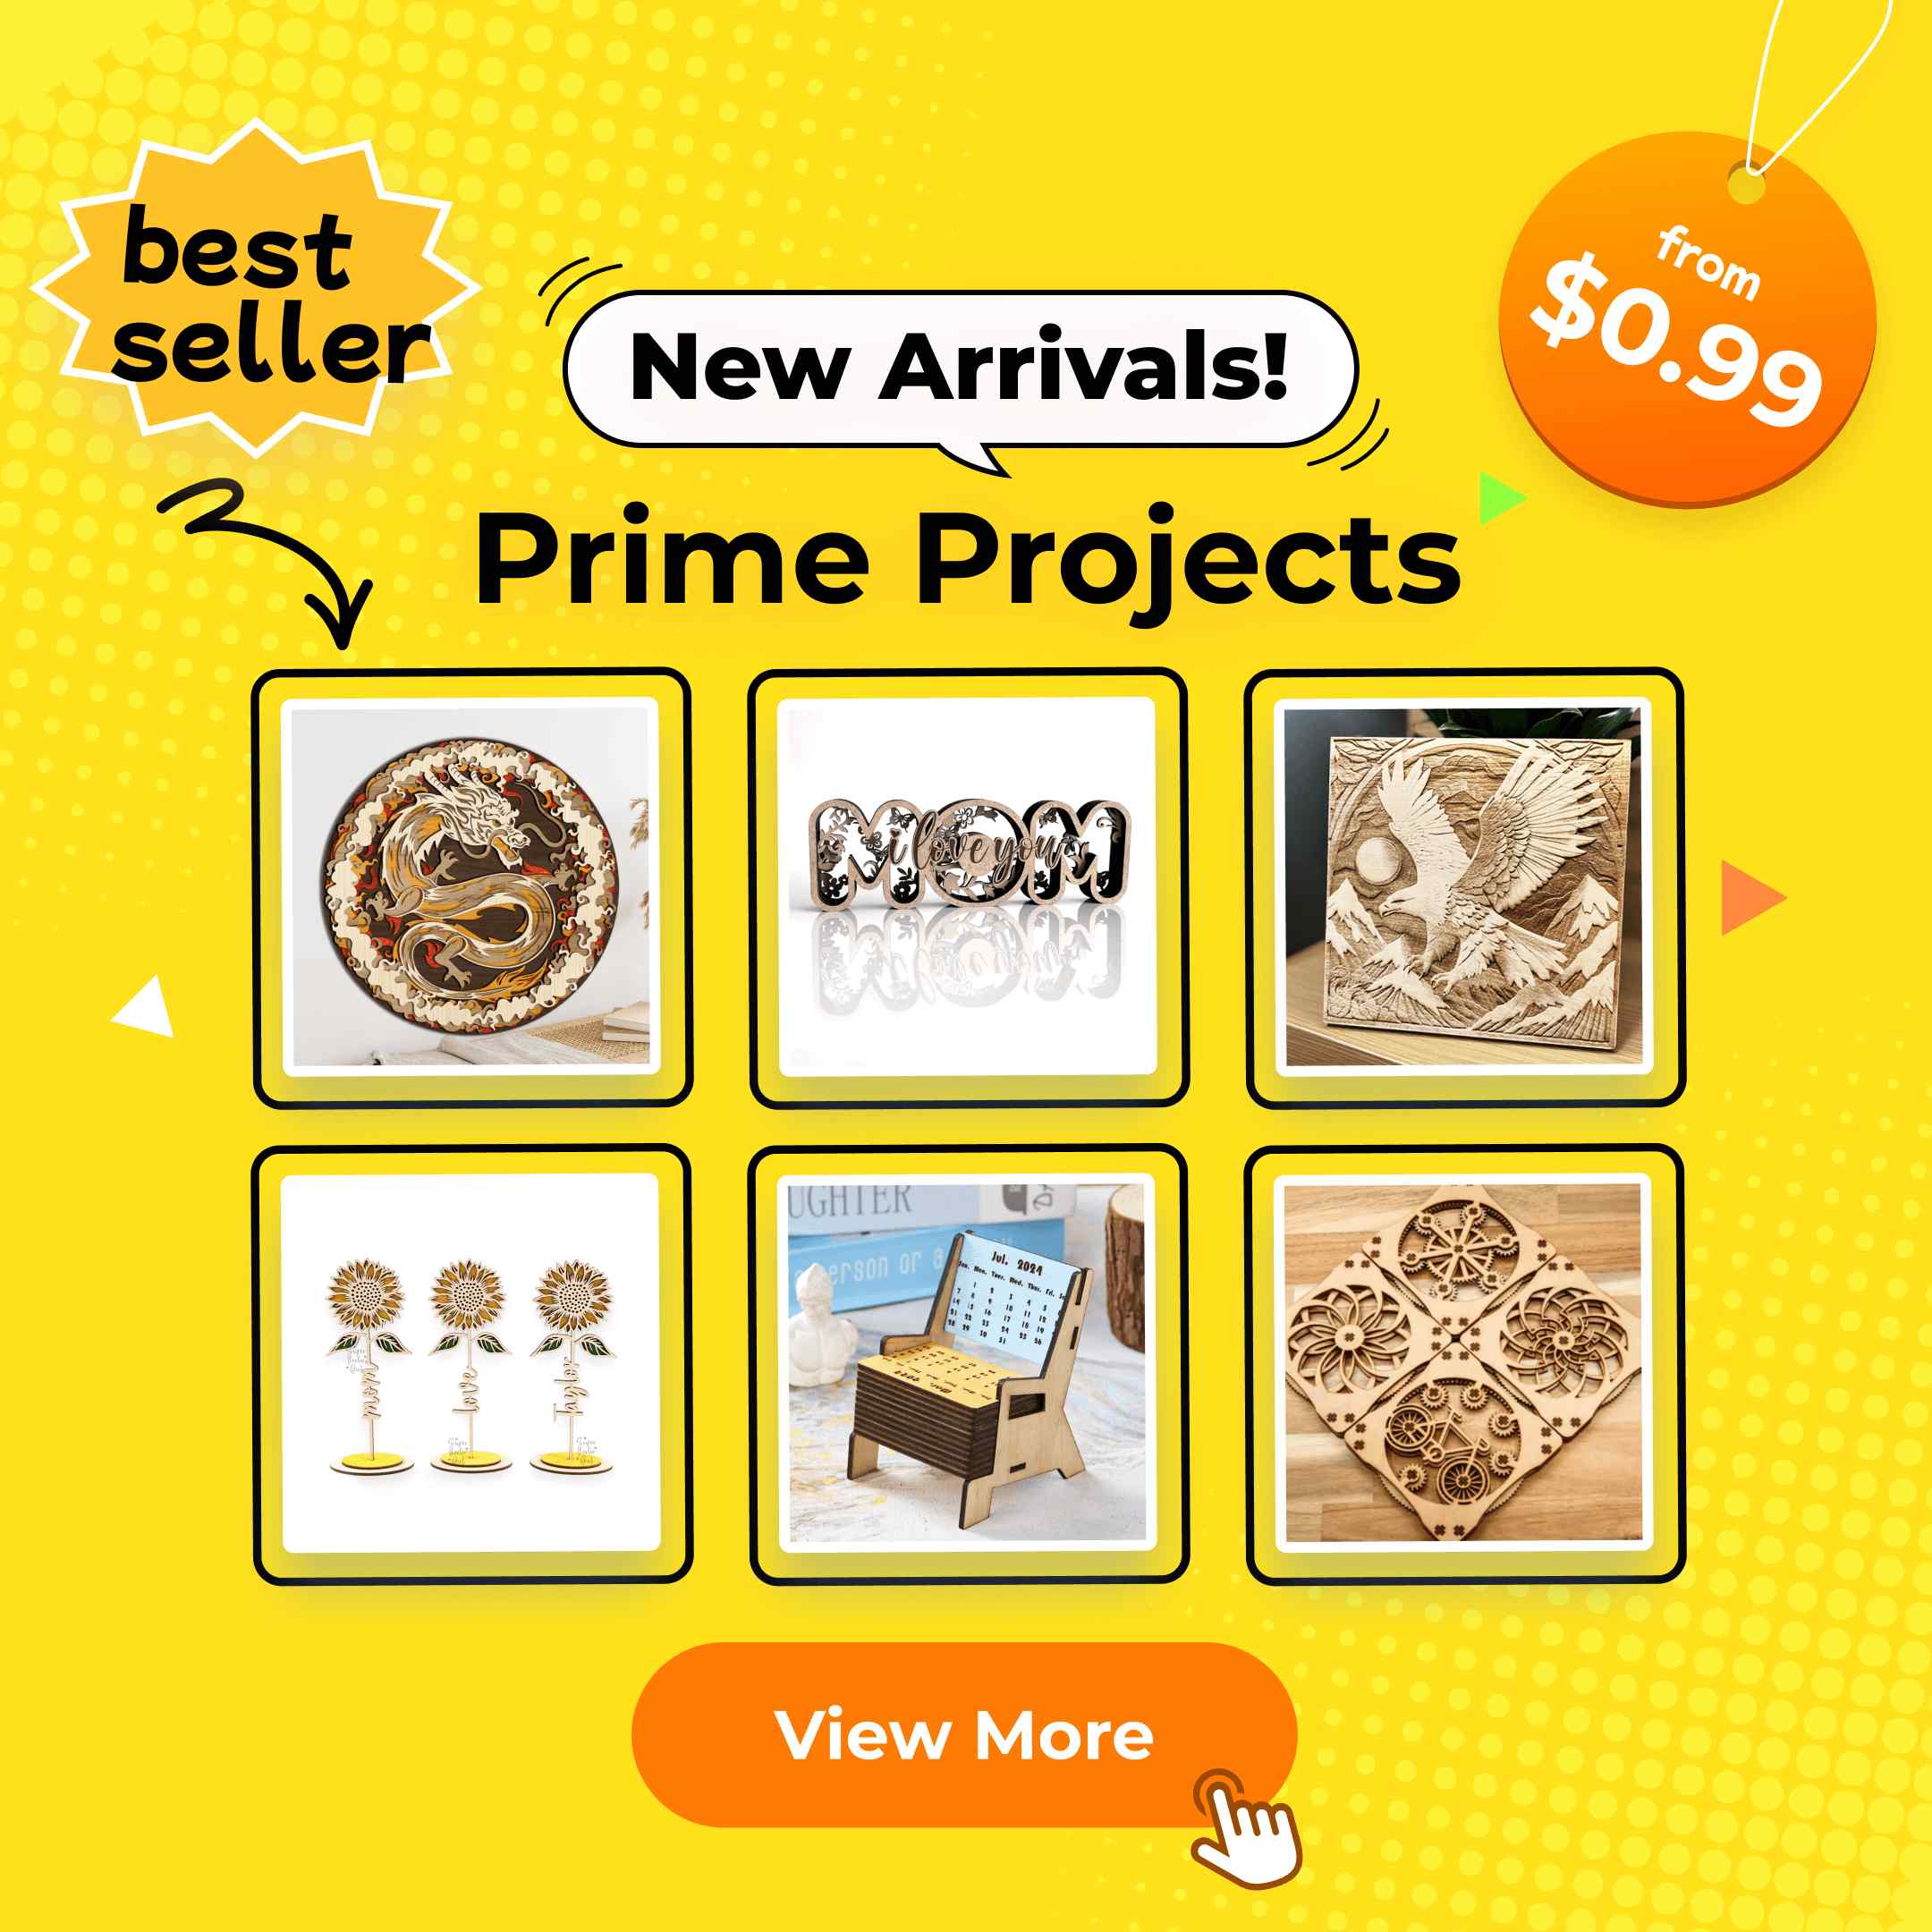 Prime Projects is now officially LIVE! 